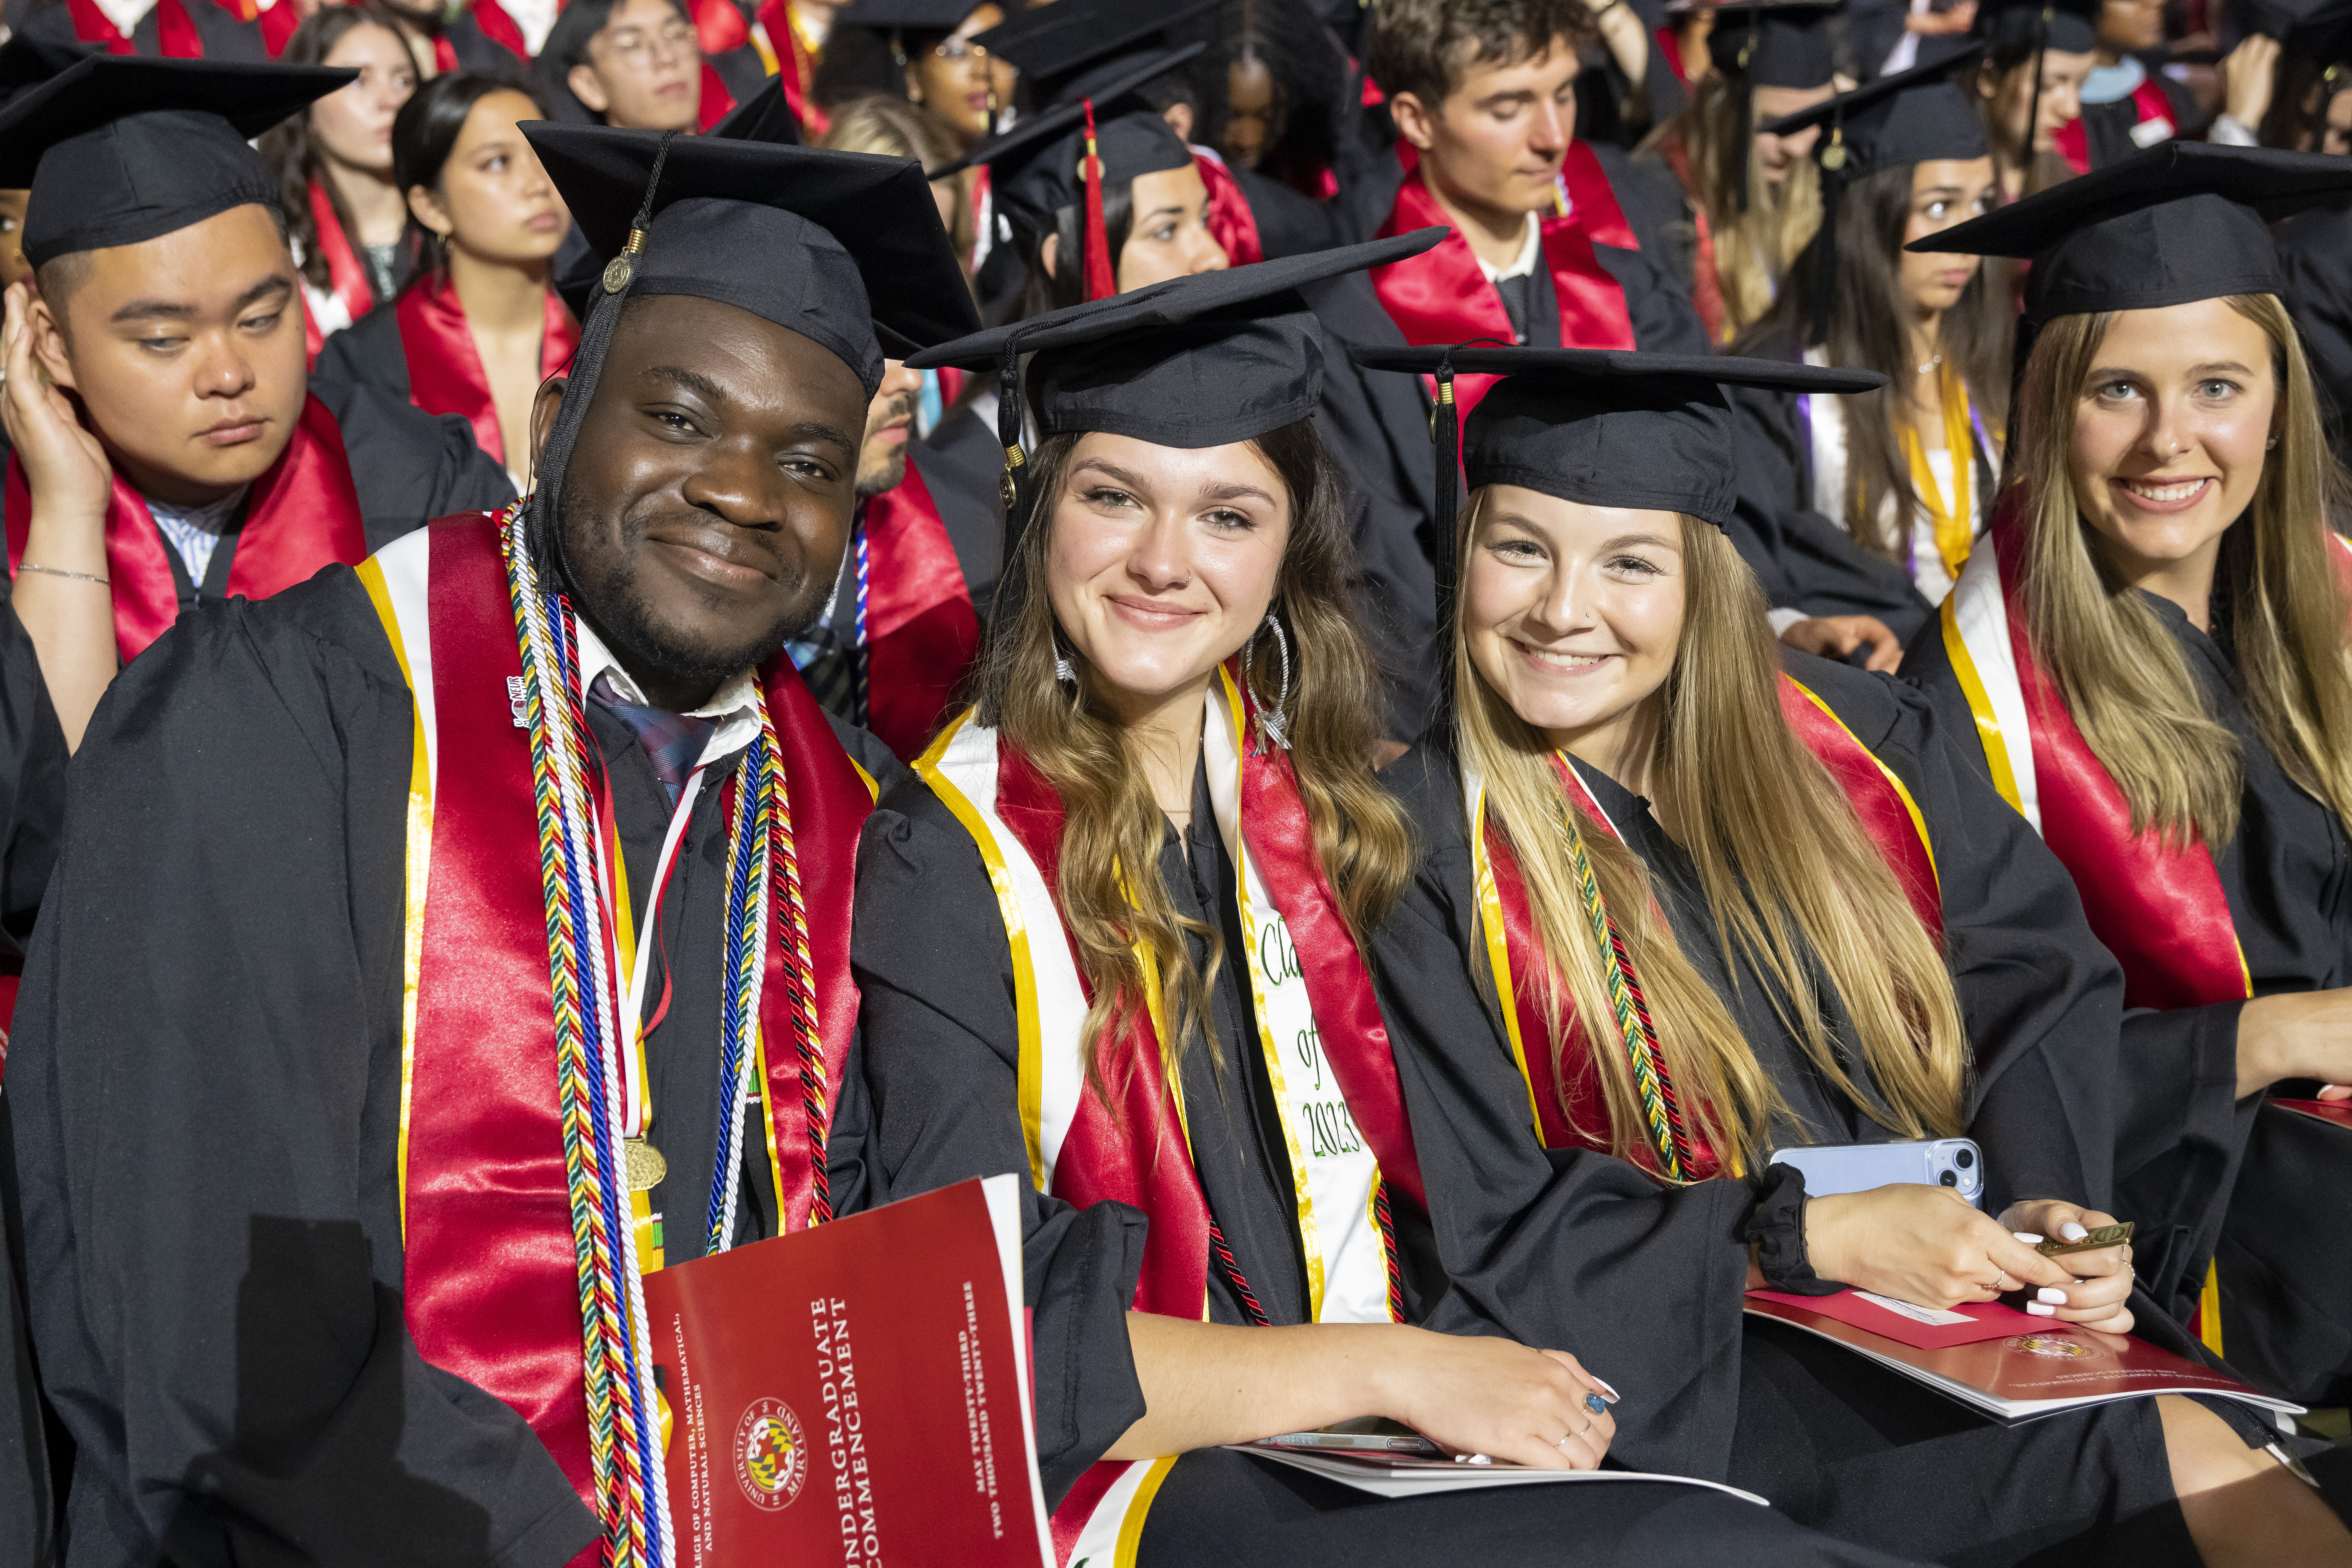 Three students seated for commencement in the Xfinity Center